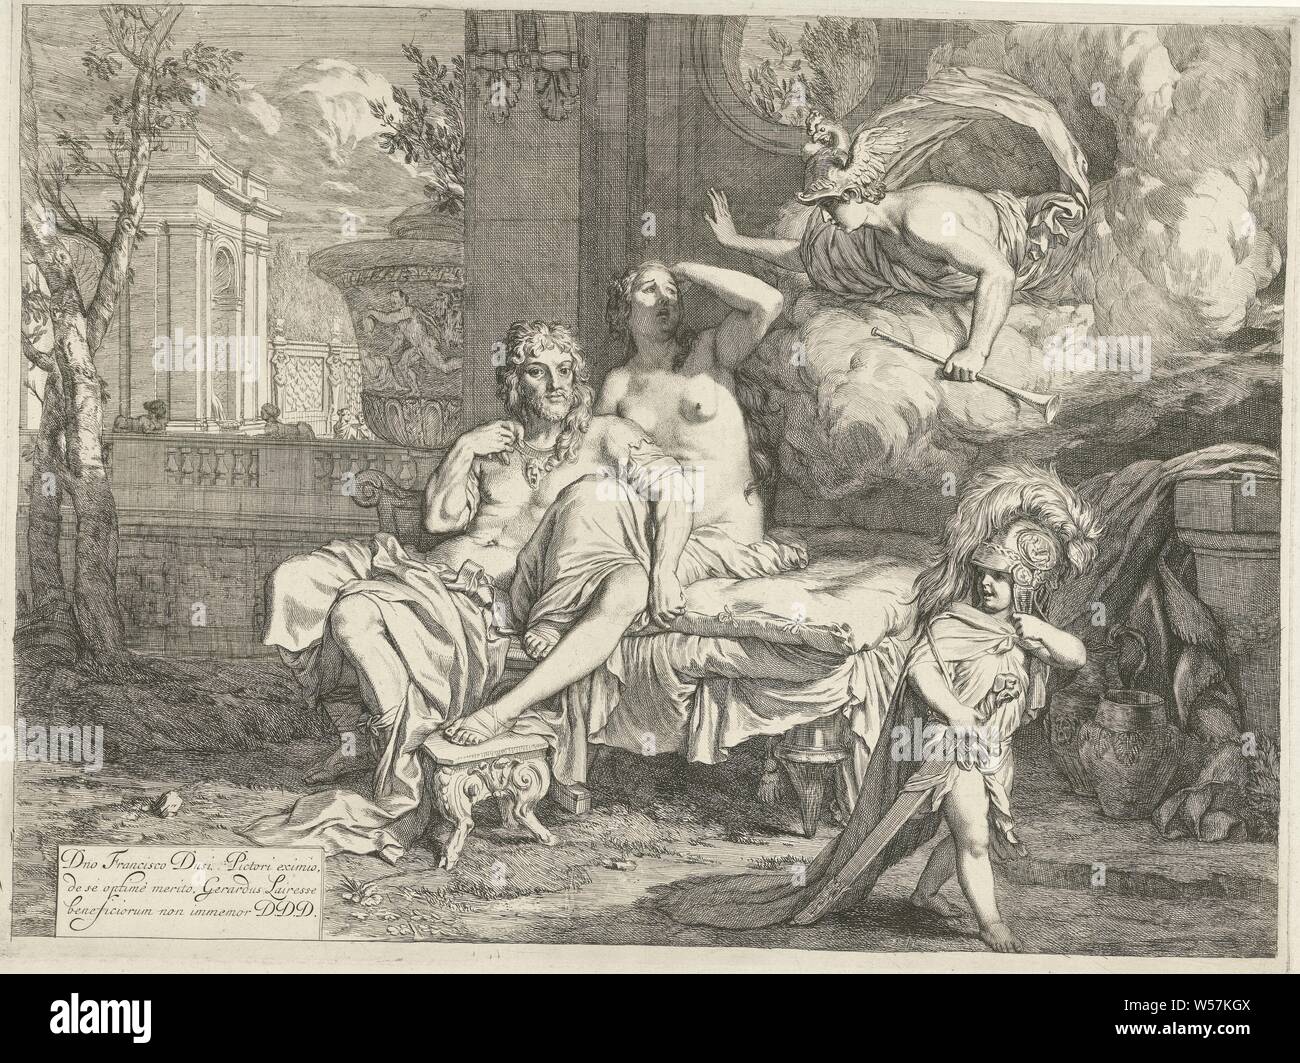 Mercury orders Calypso to let Odysseus leave, Mercury has appeared in a cloud and orders Calypso to let Odysseus leave. In the right foreground Amor poses with the helmet and sword of Odysseus, Mercury orders Calypso to release Ulysses (Homer, Odyssey V), Gerard de Lairesse, 1670, paper, etching, h 259 mm × w 483 mm Stock Photo